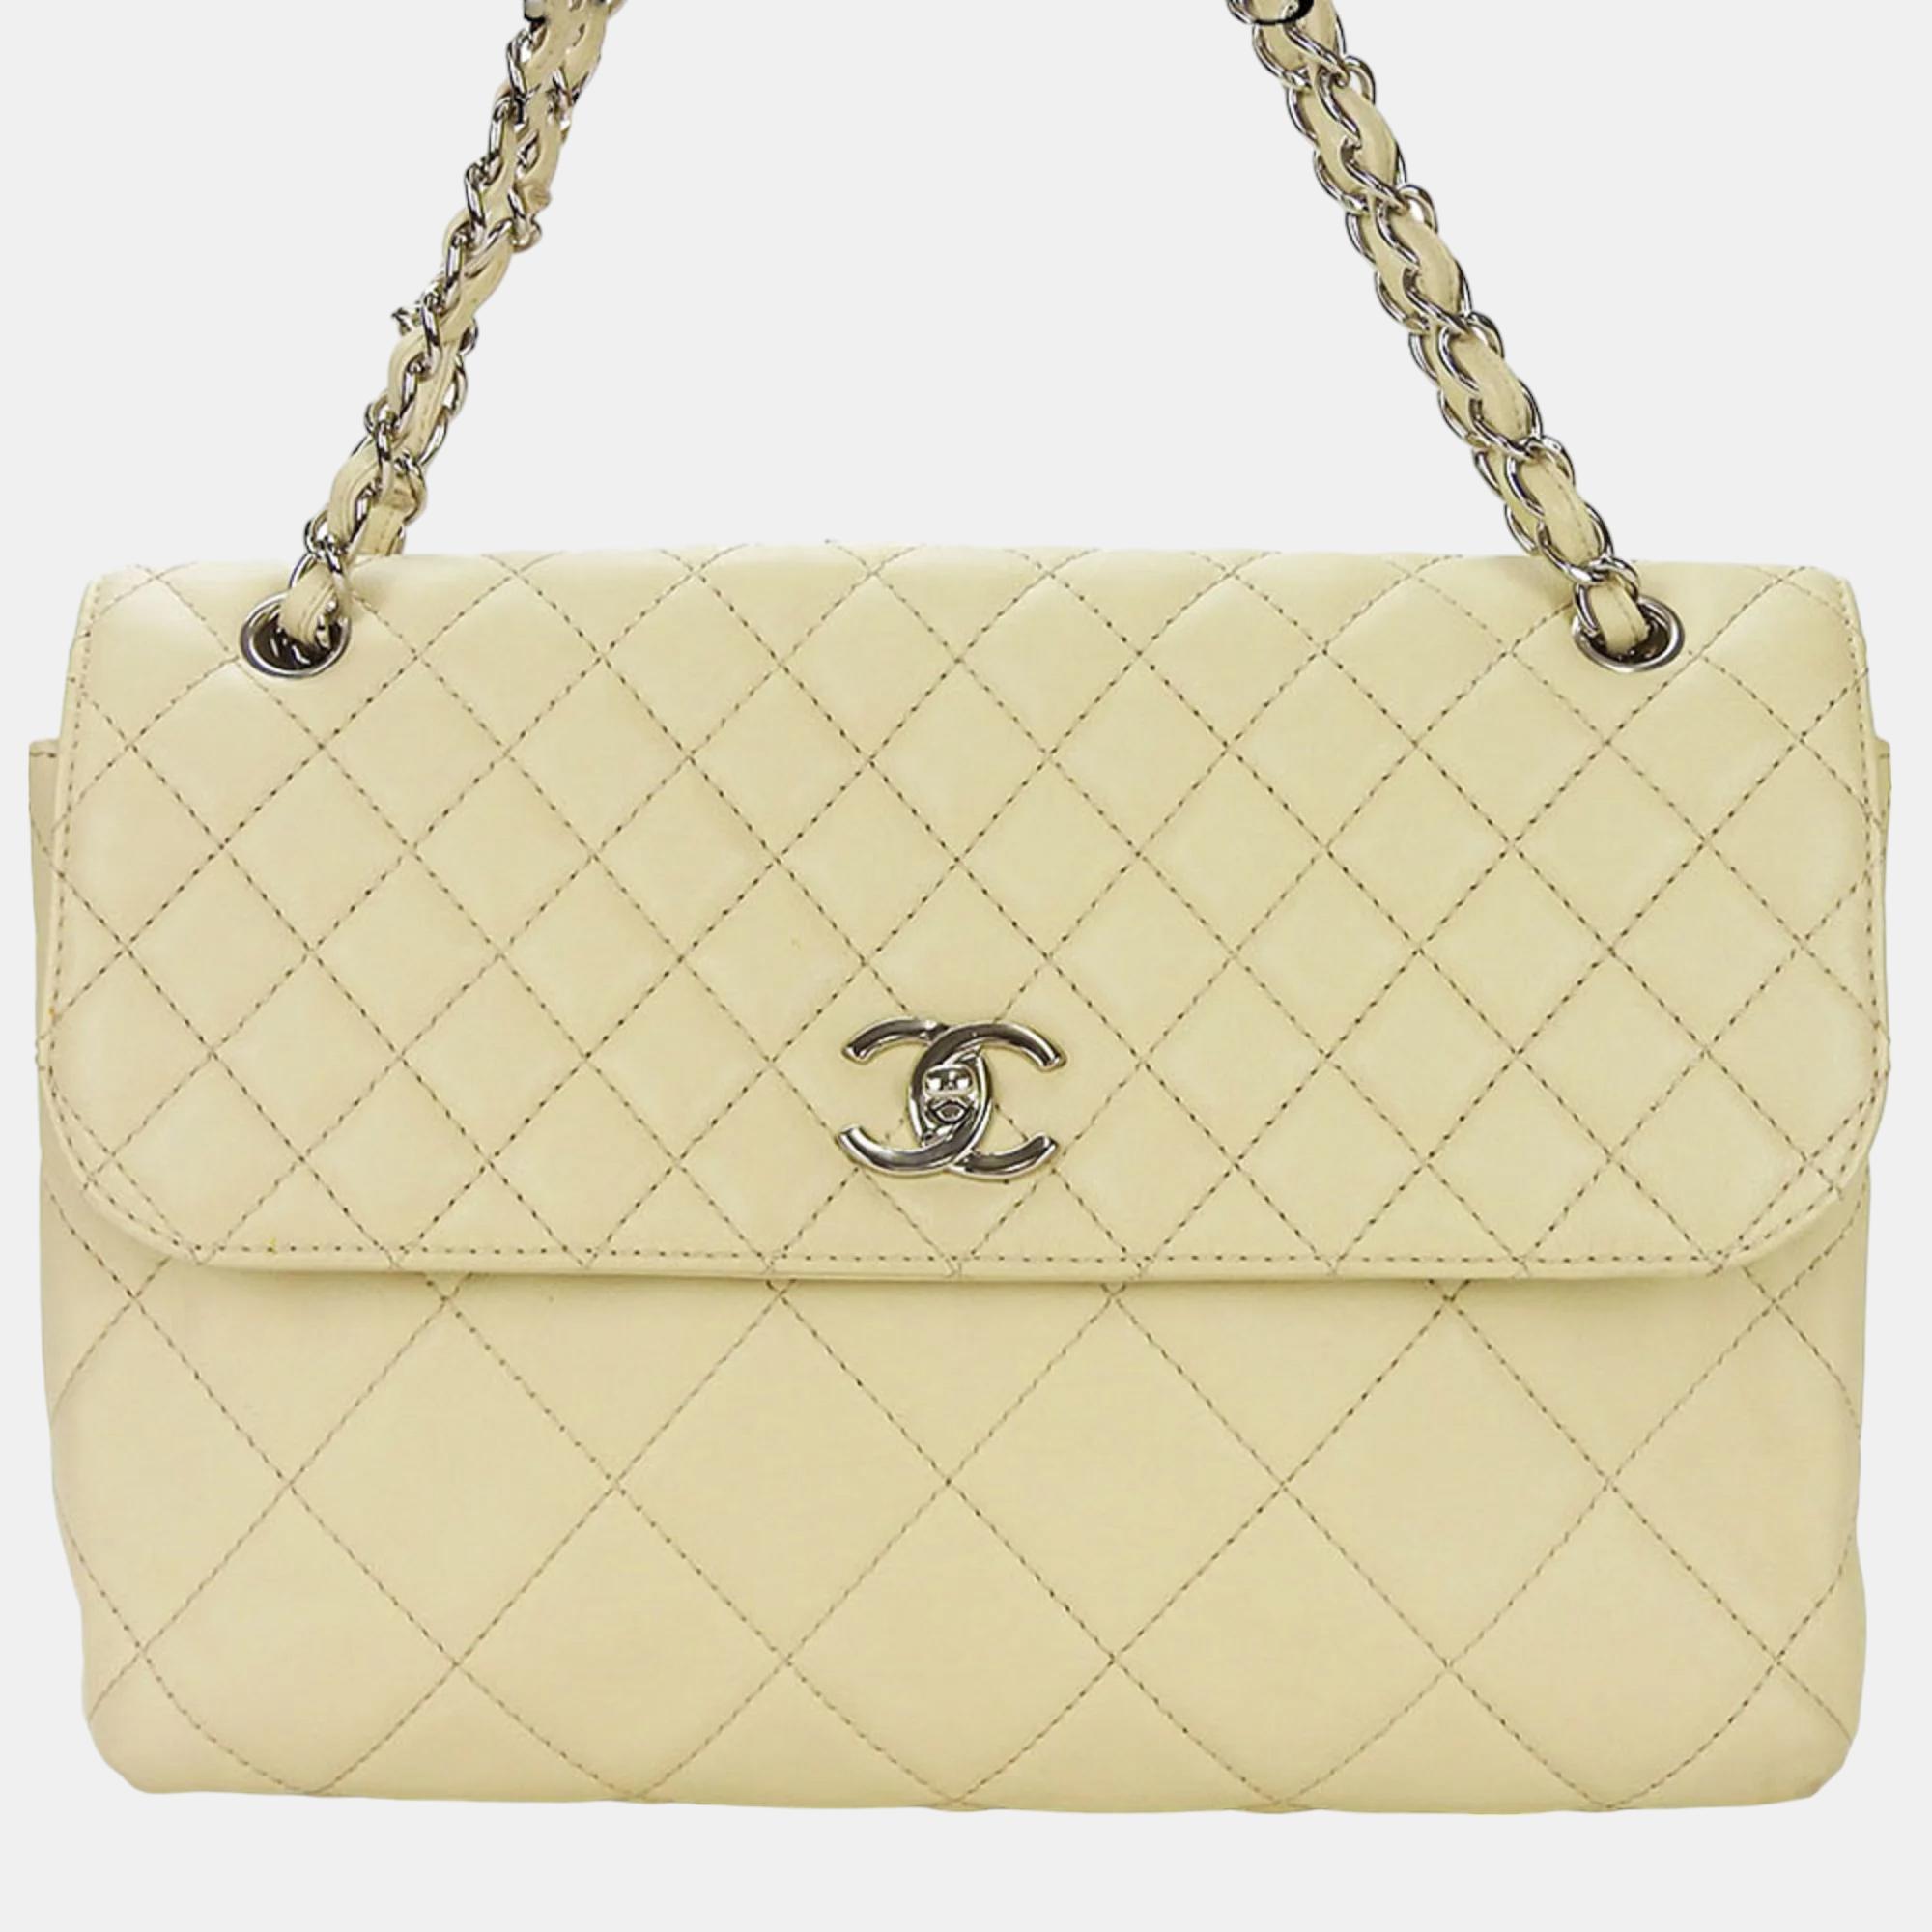 Chanel beige quilted lambskin maxi in the business flap shoulder bag